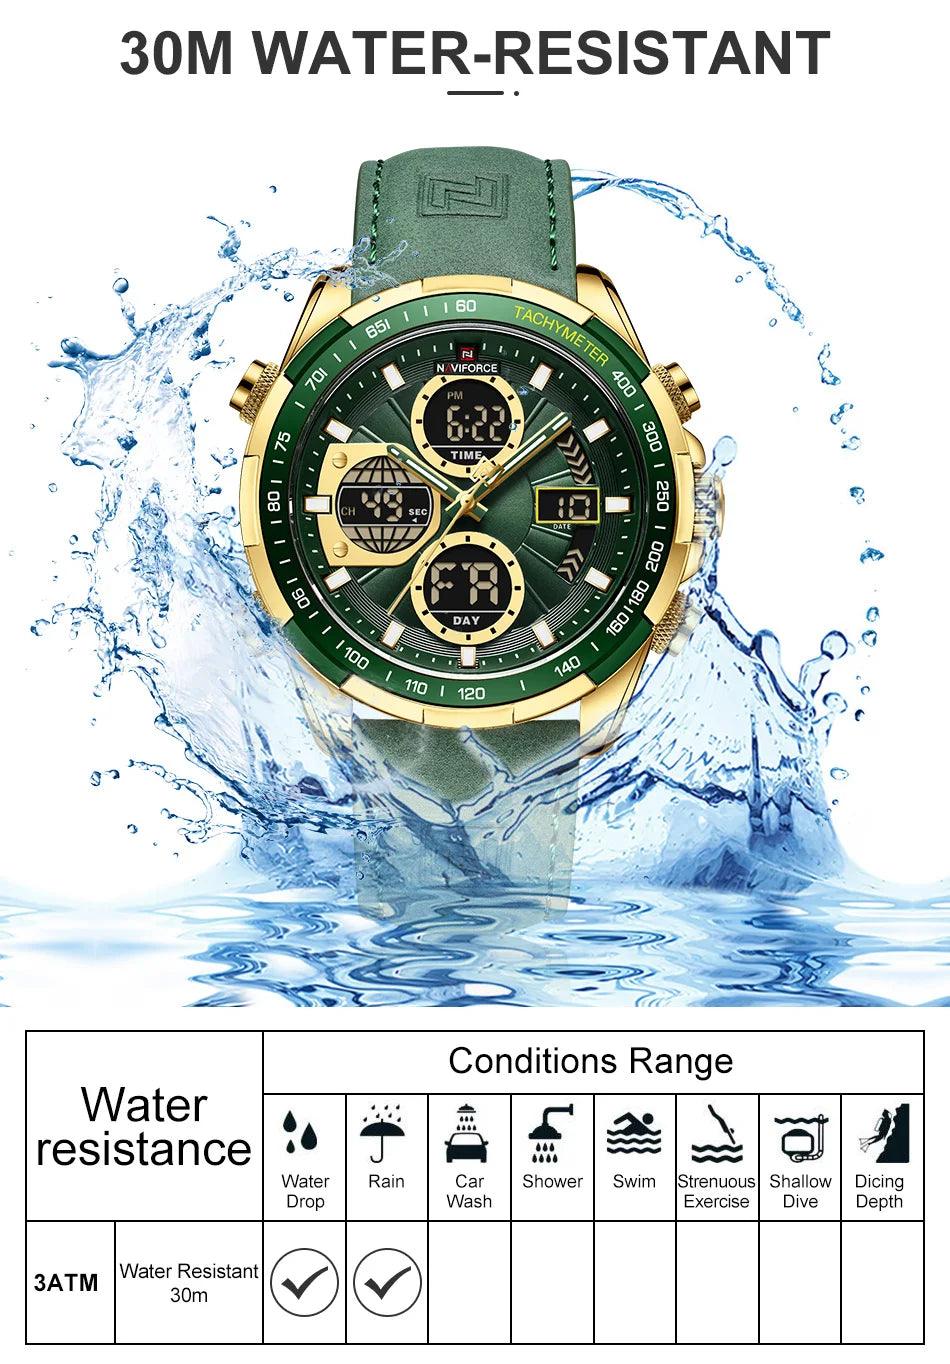 Popular Brand Military Style Sport Waterproof Watches for Men - Quartz Leather Strap Chronograph Wristwatches - The Jewellery Supermarket